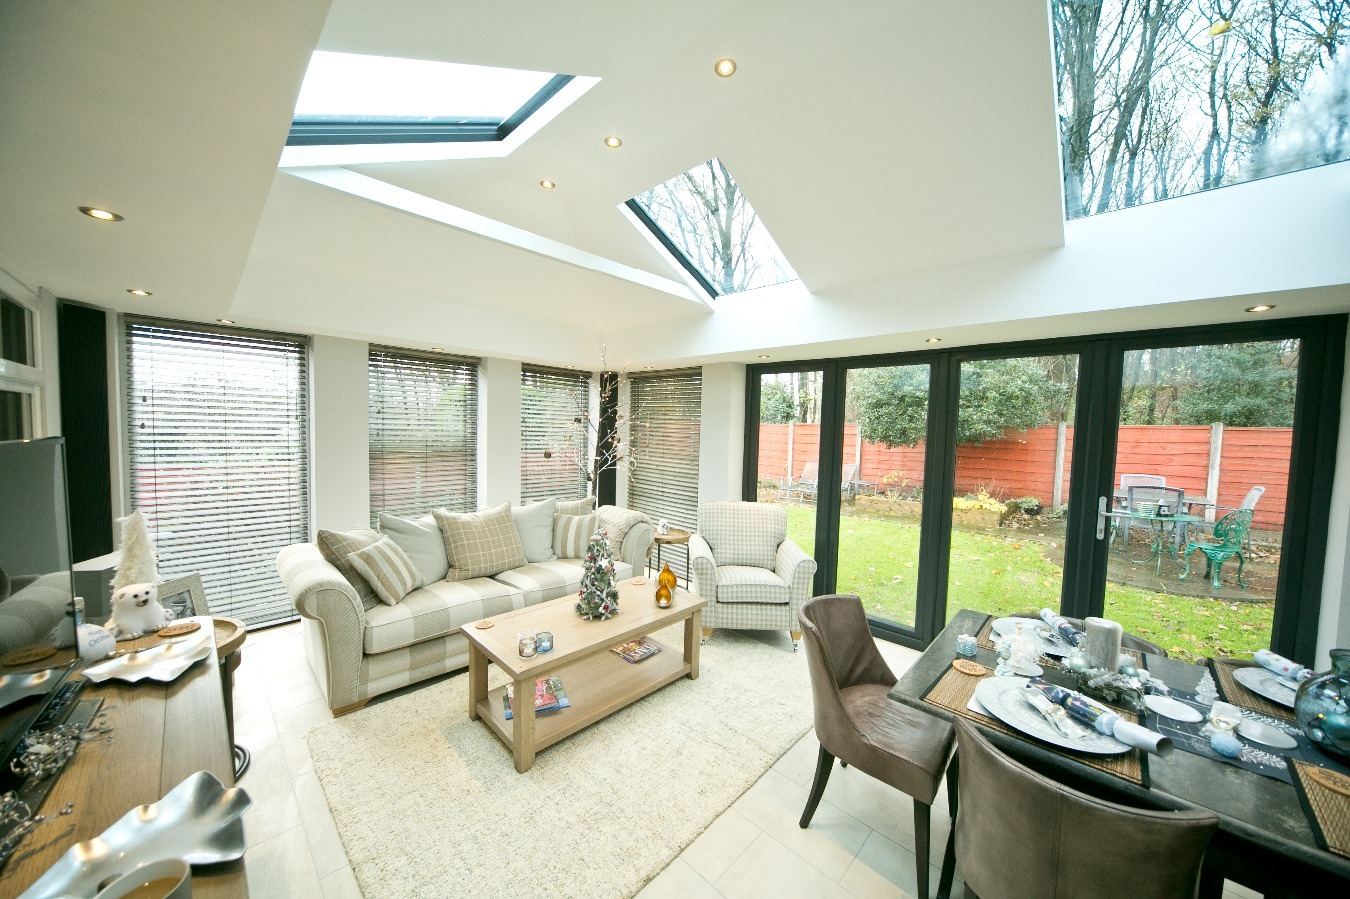 Roof lanterns at 3D windows as an extra feature